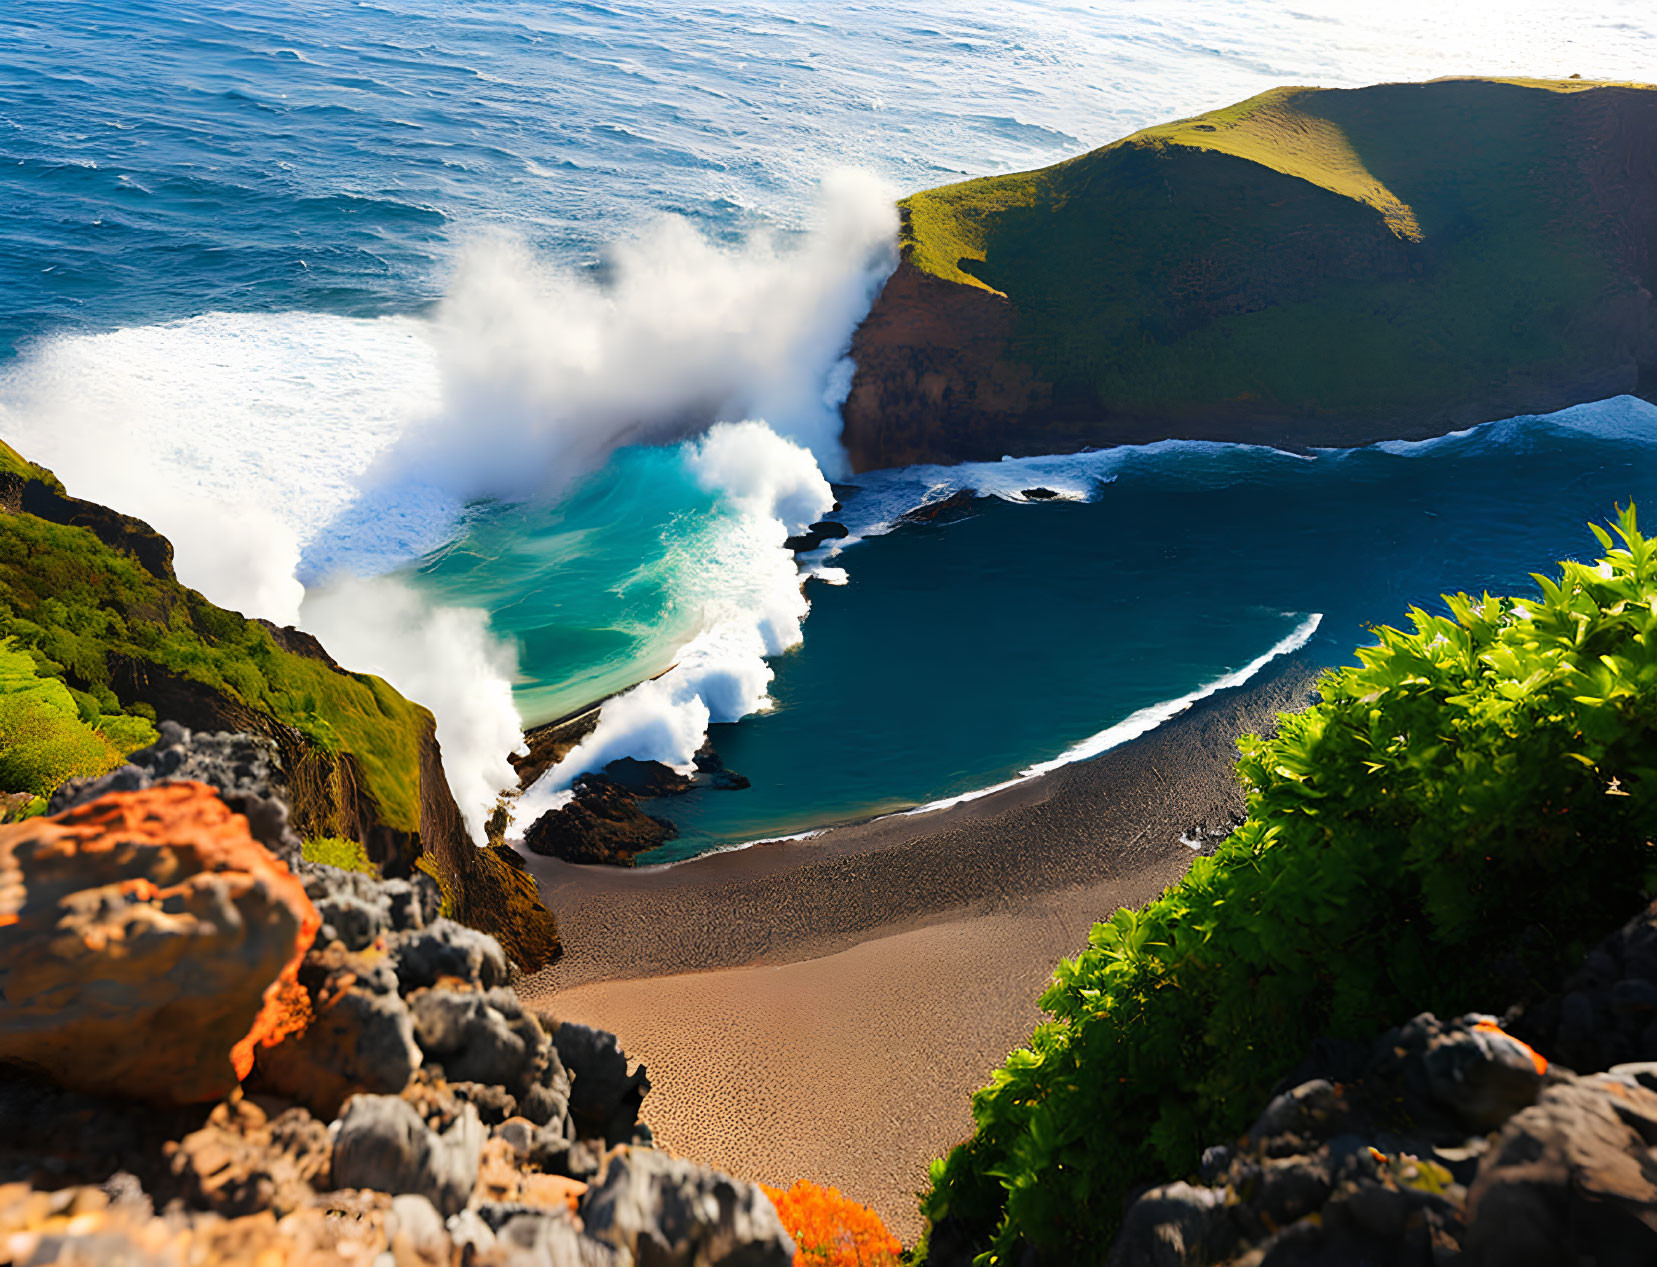 Aerial view of large wave crashing on secluded beach with cliffs and greenery